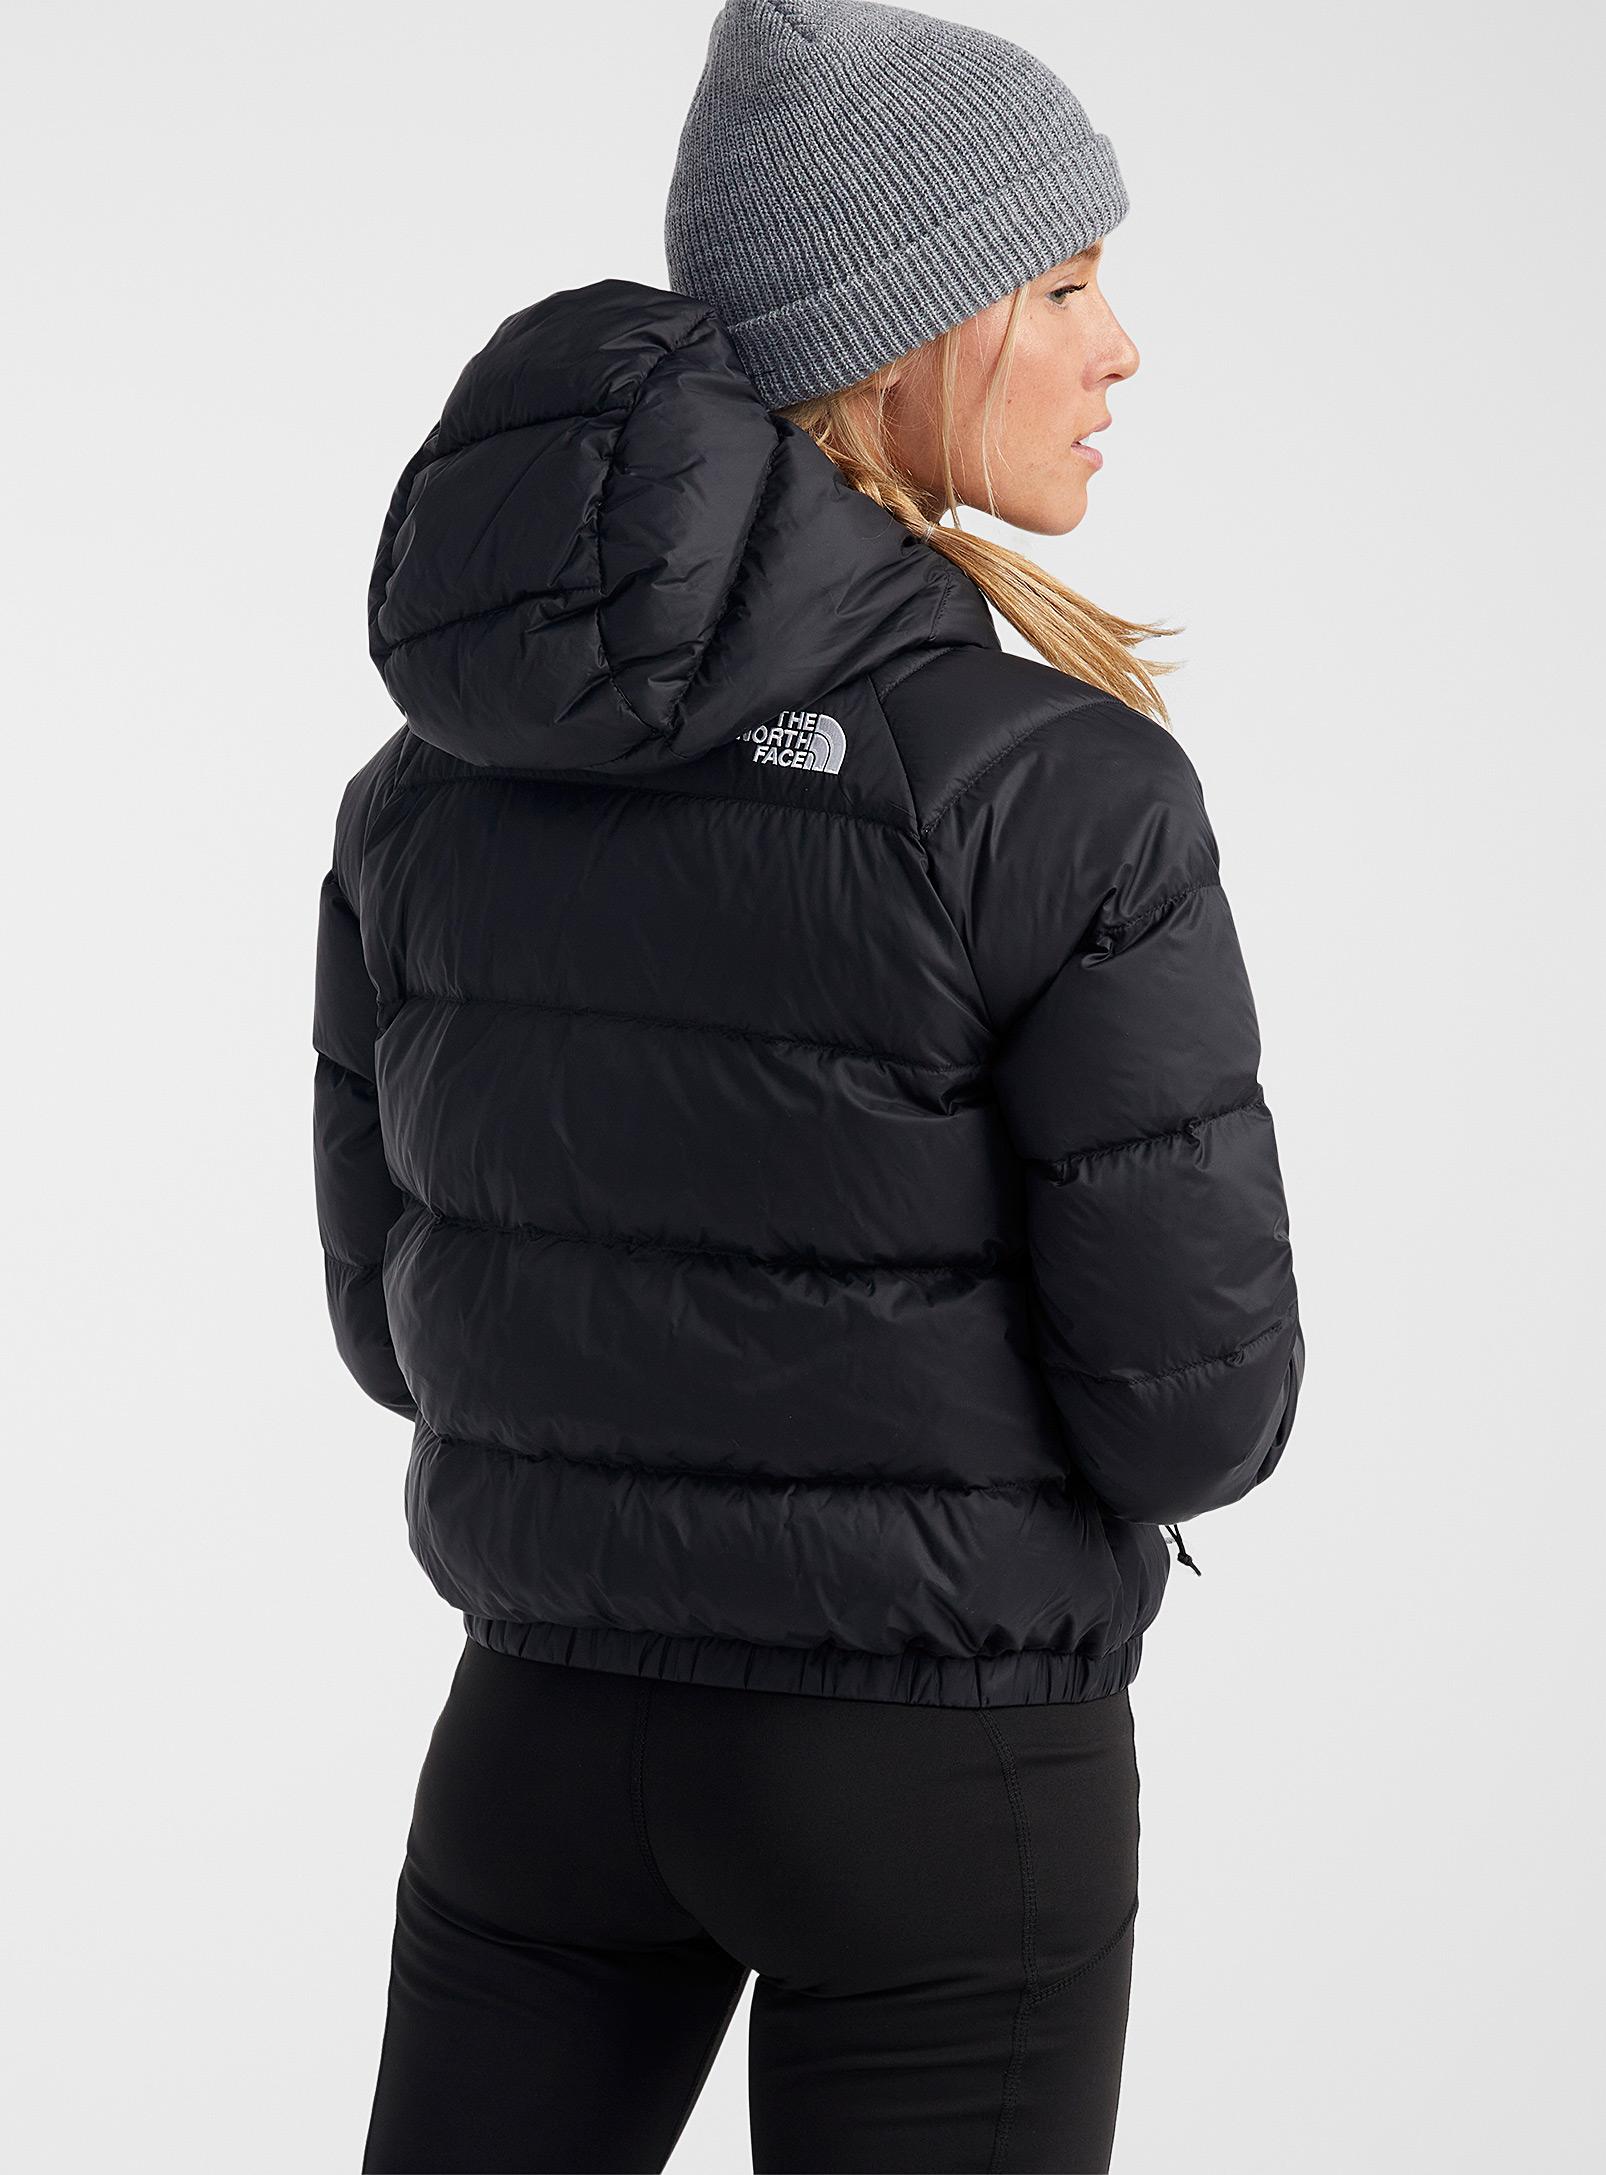 https://cdna.lystit.com/photos/simons/adc79eac/the-north-face-Black-Hydrenalite-Cropped-Hooded-Puffer-Jacket.jpeg